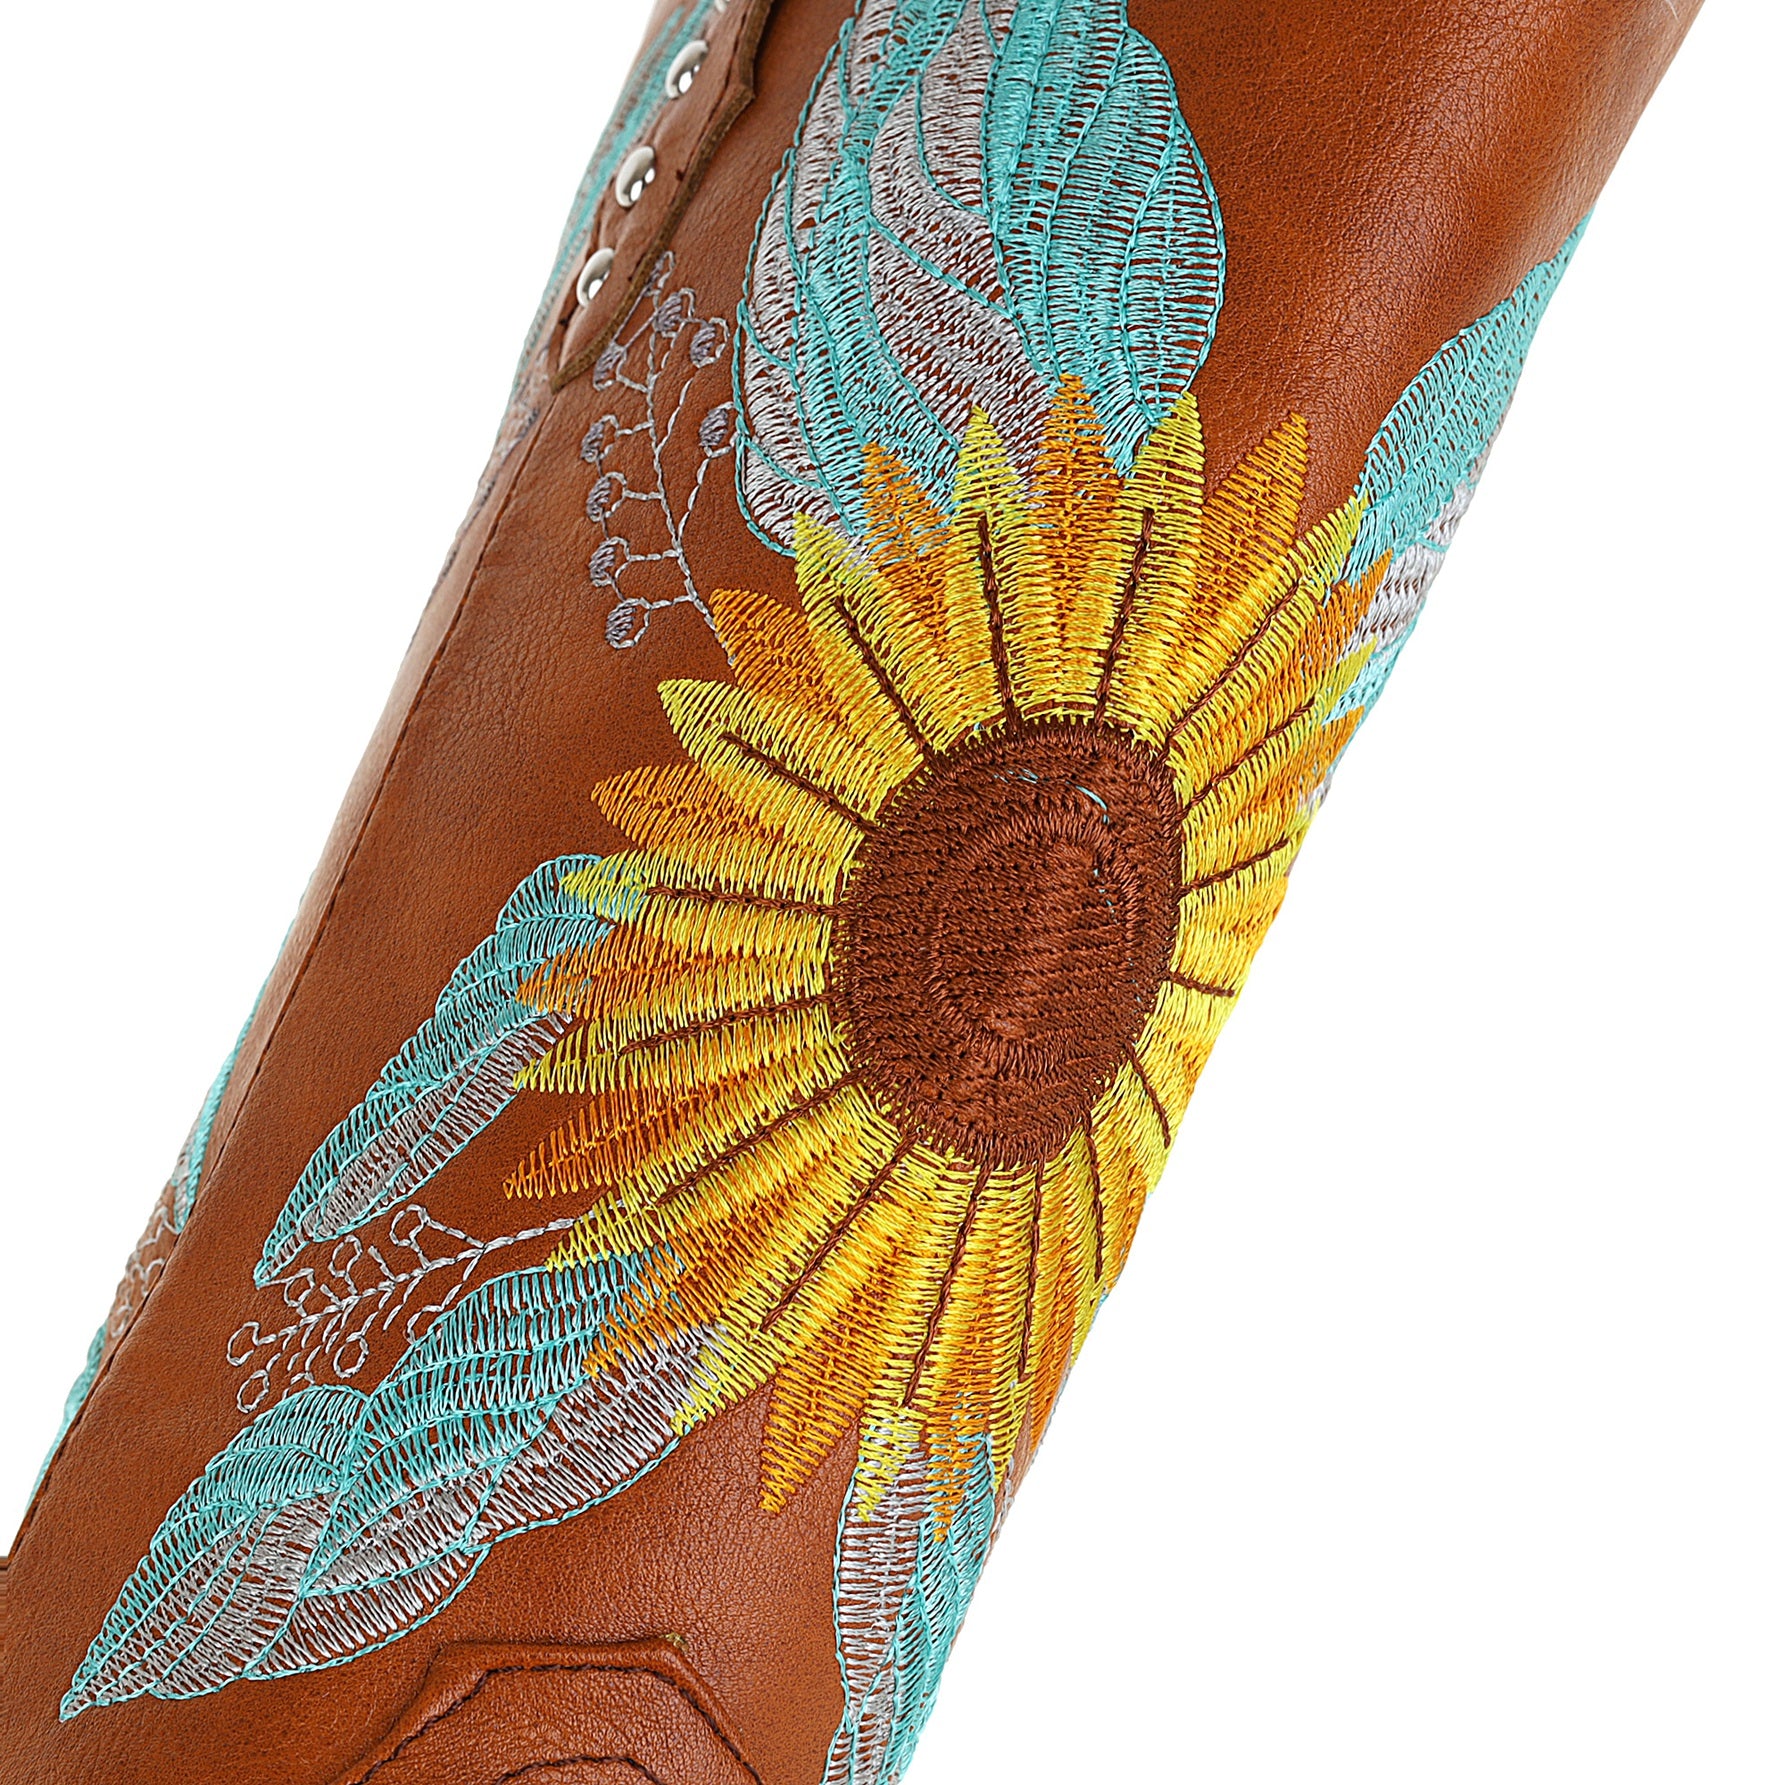 Bigsizeheels Western vintage Sunflower embroidery boots - Brown freeshipping - bigsizeheel®-size5-size15 -All Plus Sizes Available!